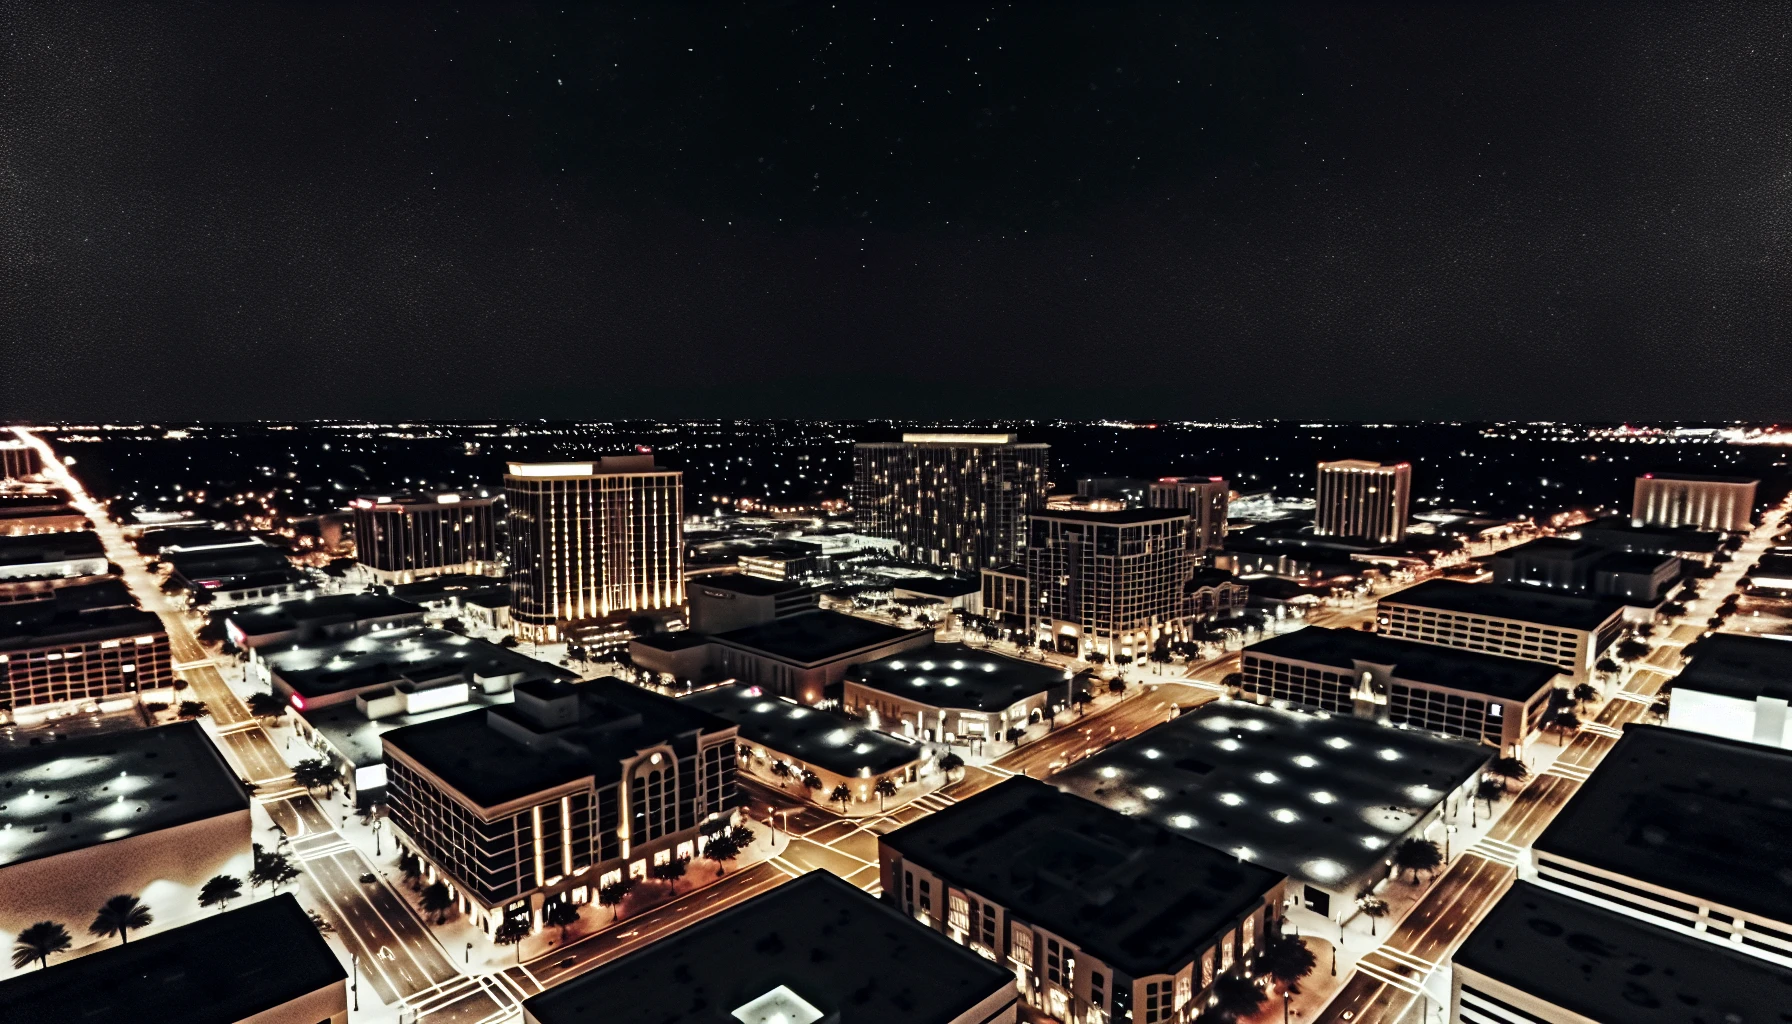 Cityscape of Orlando at night with illuminated buildings and streets